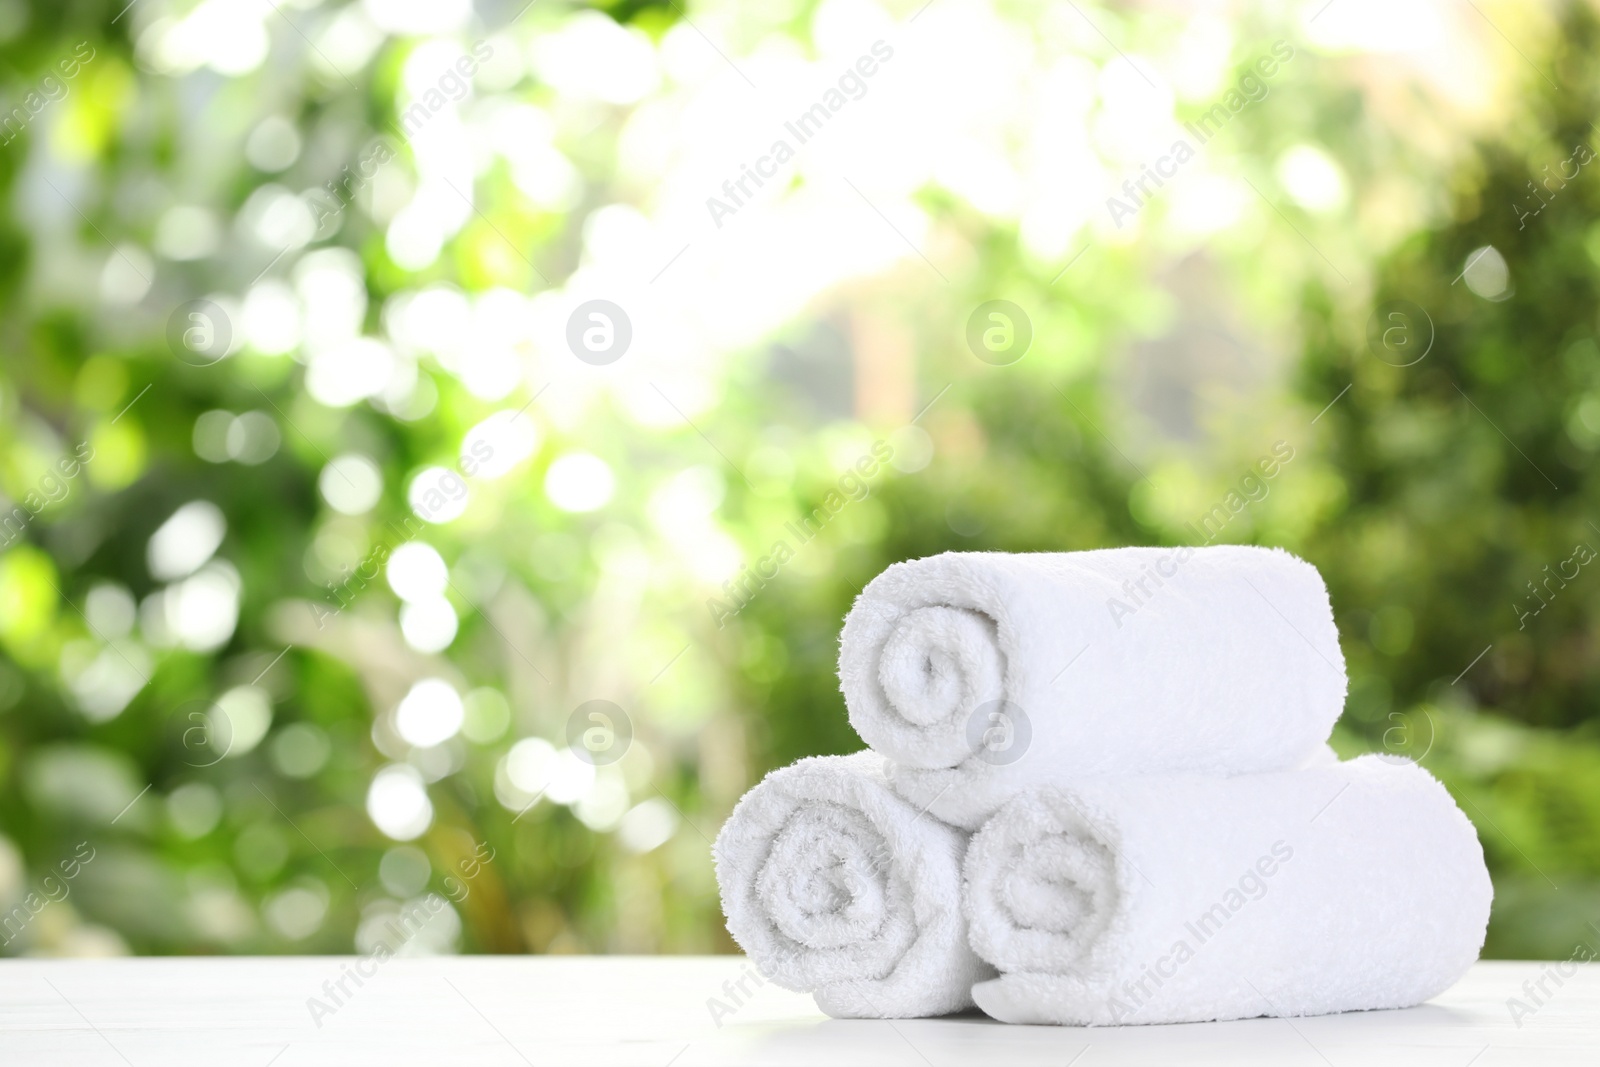 Photo of Soft bath towels on table against blurred background. Space for text